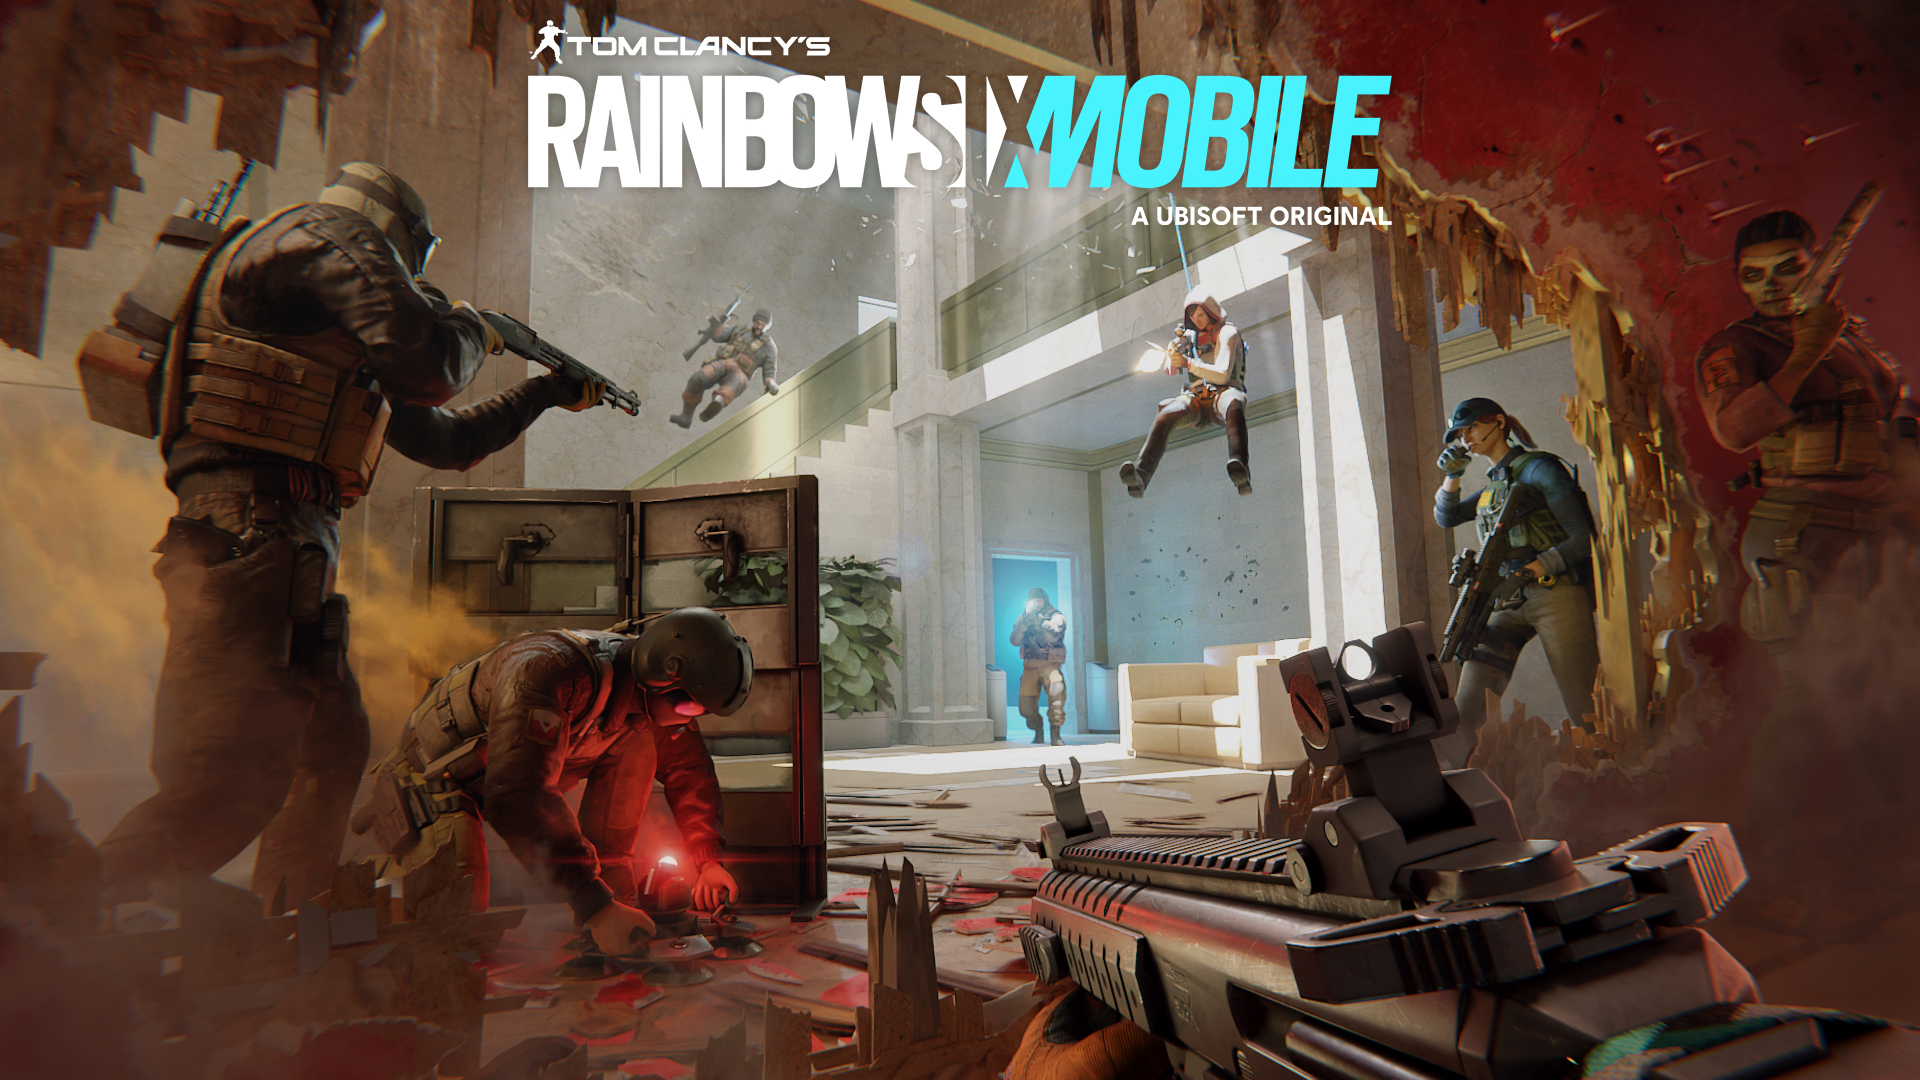 FIRST FULL GAMEPLAY in Rainbow Six Mobile Beta! (FREE Beta Codes